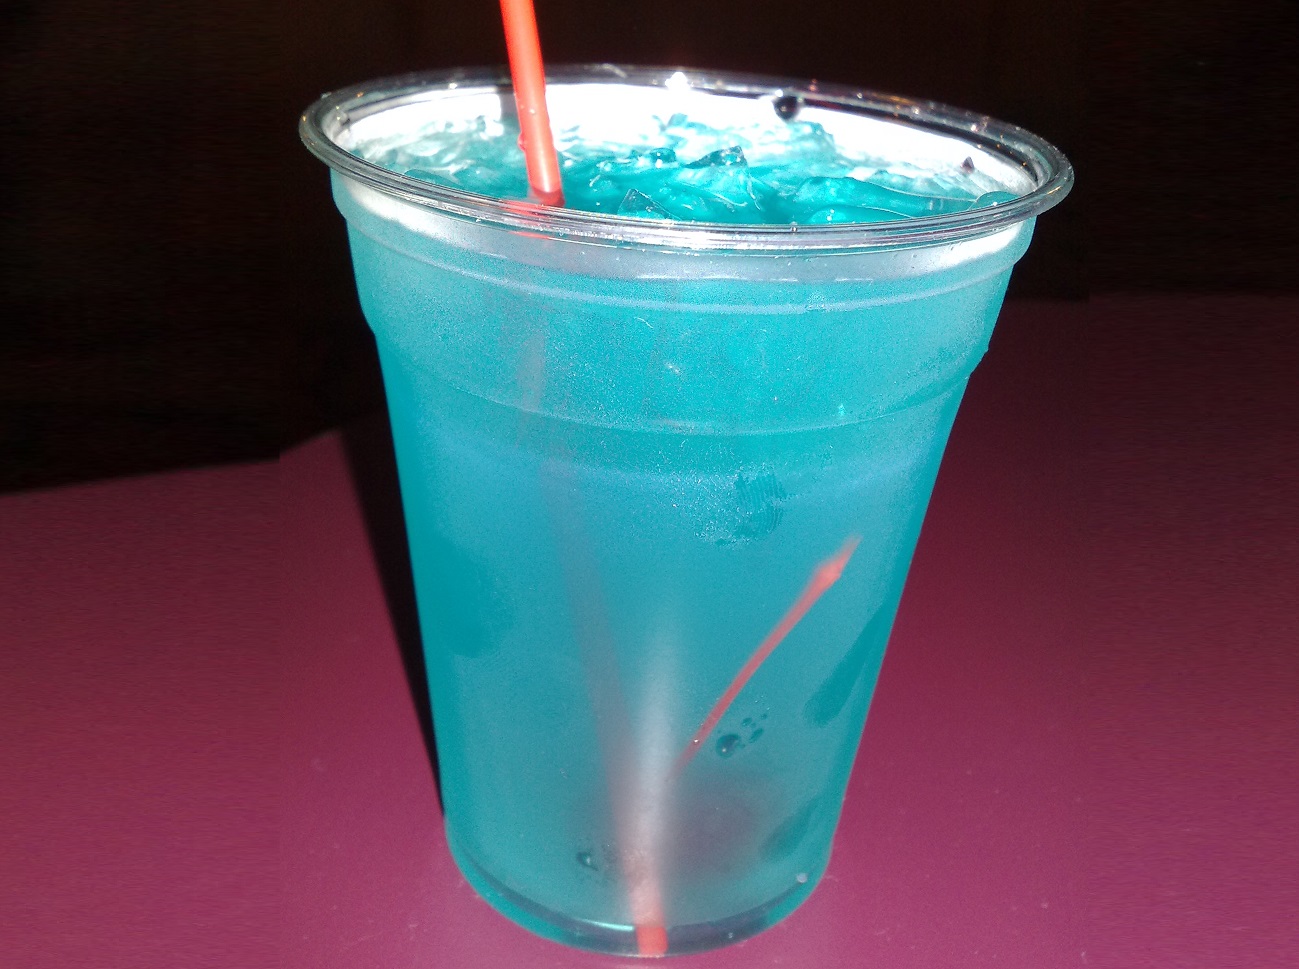 <p>The Tealasaurus looks fun and tastes amazing. With Bourbon, blue curacao, triple sec, lemon juice, and lemonade, it's sweet and zingy. The servers will also garnish it with two lemons that look like Mickey's Ears. Adorable. </p>